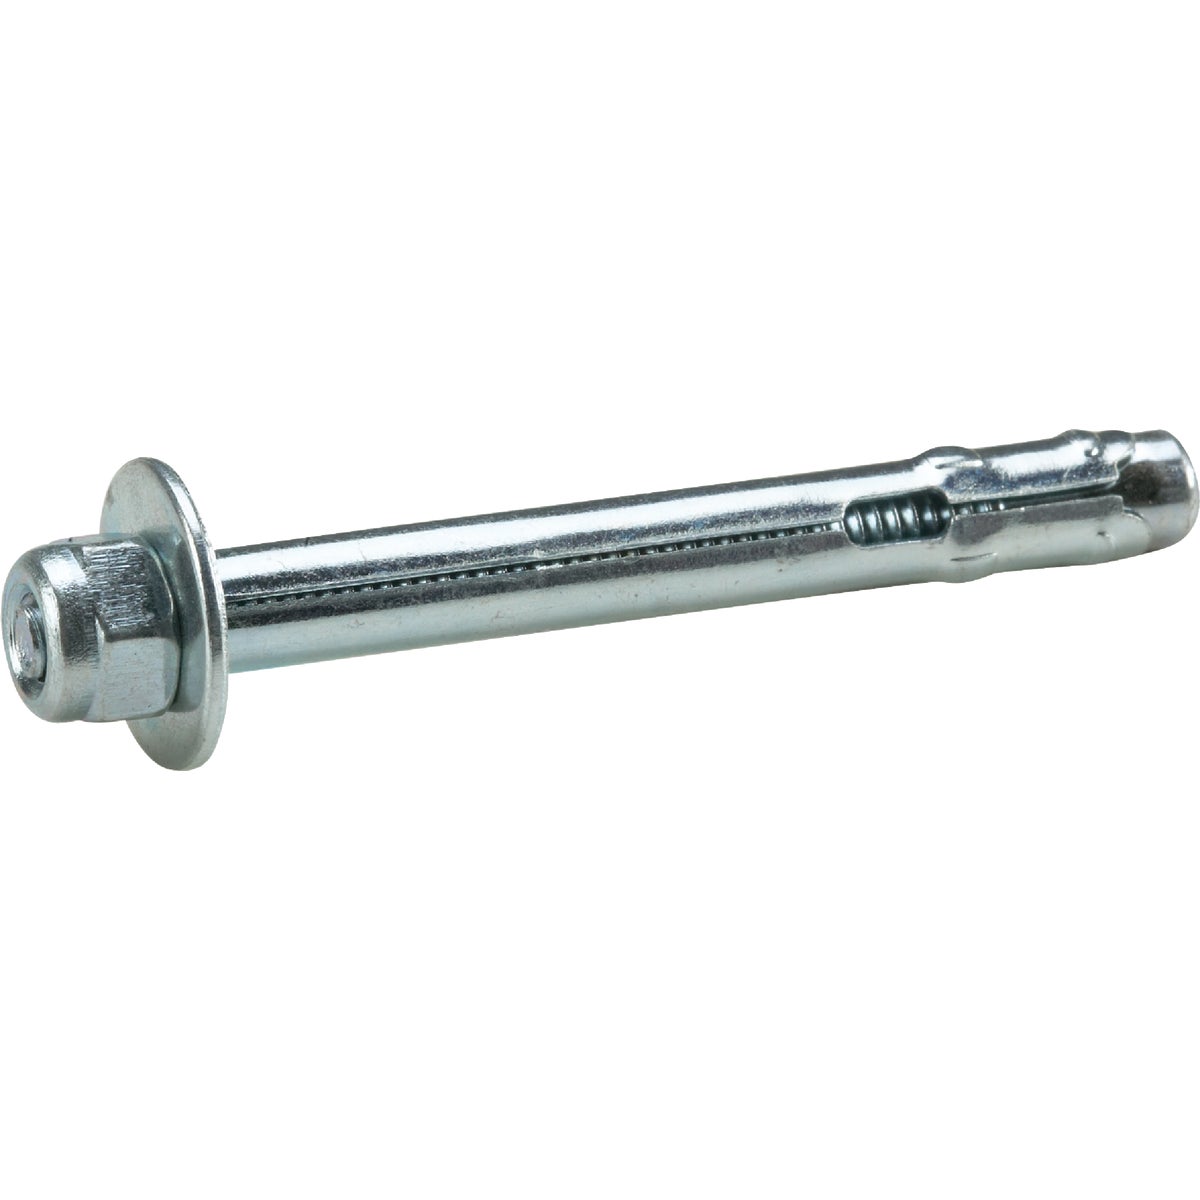 Red Head 50122 Red Head 1/4 In. x 2-1/4 In. Sleeve Stud Bolt Anchor 50122